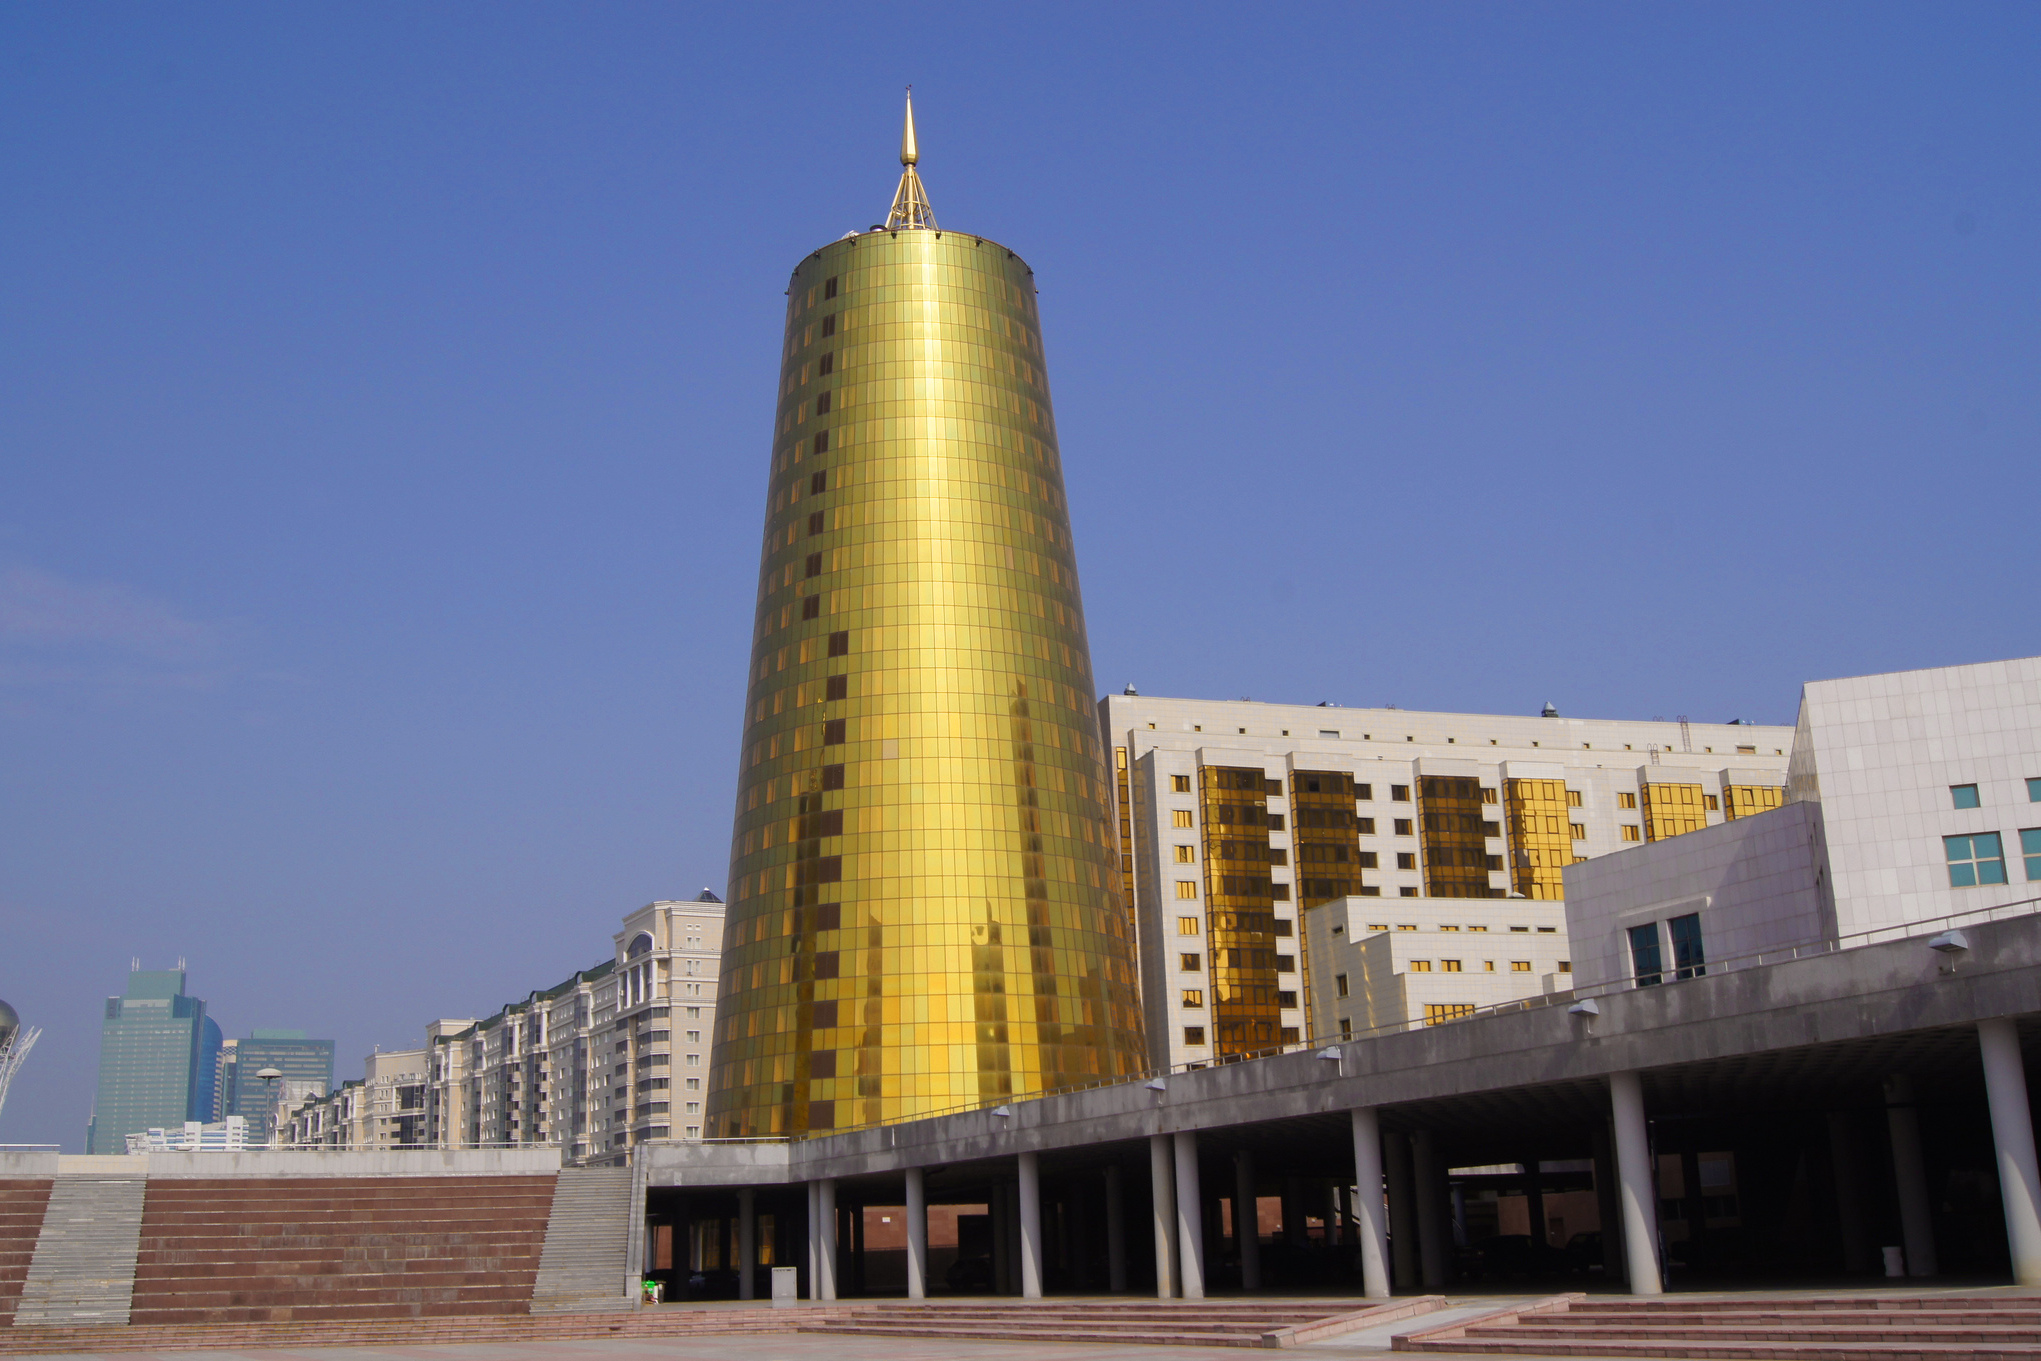 A tour of Astana's wacky and wonderful architecture